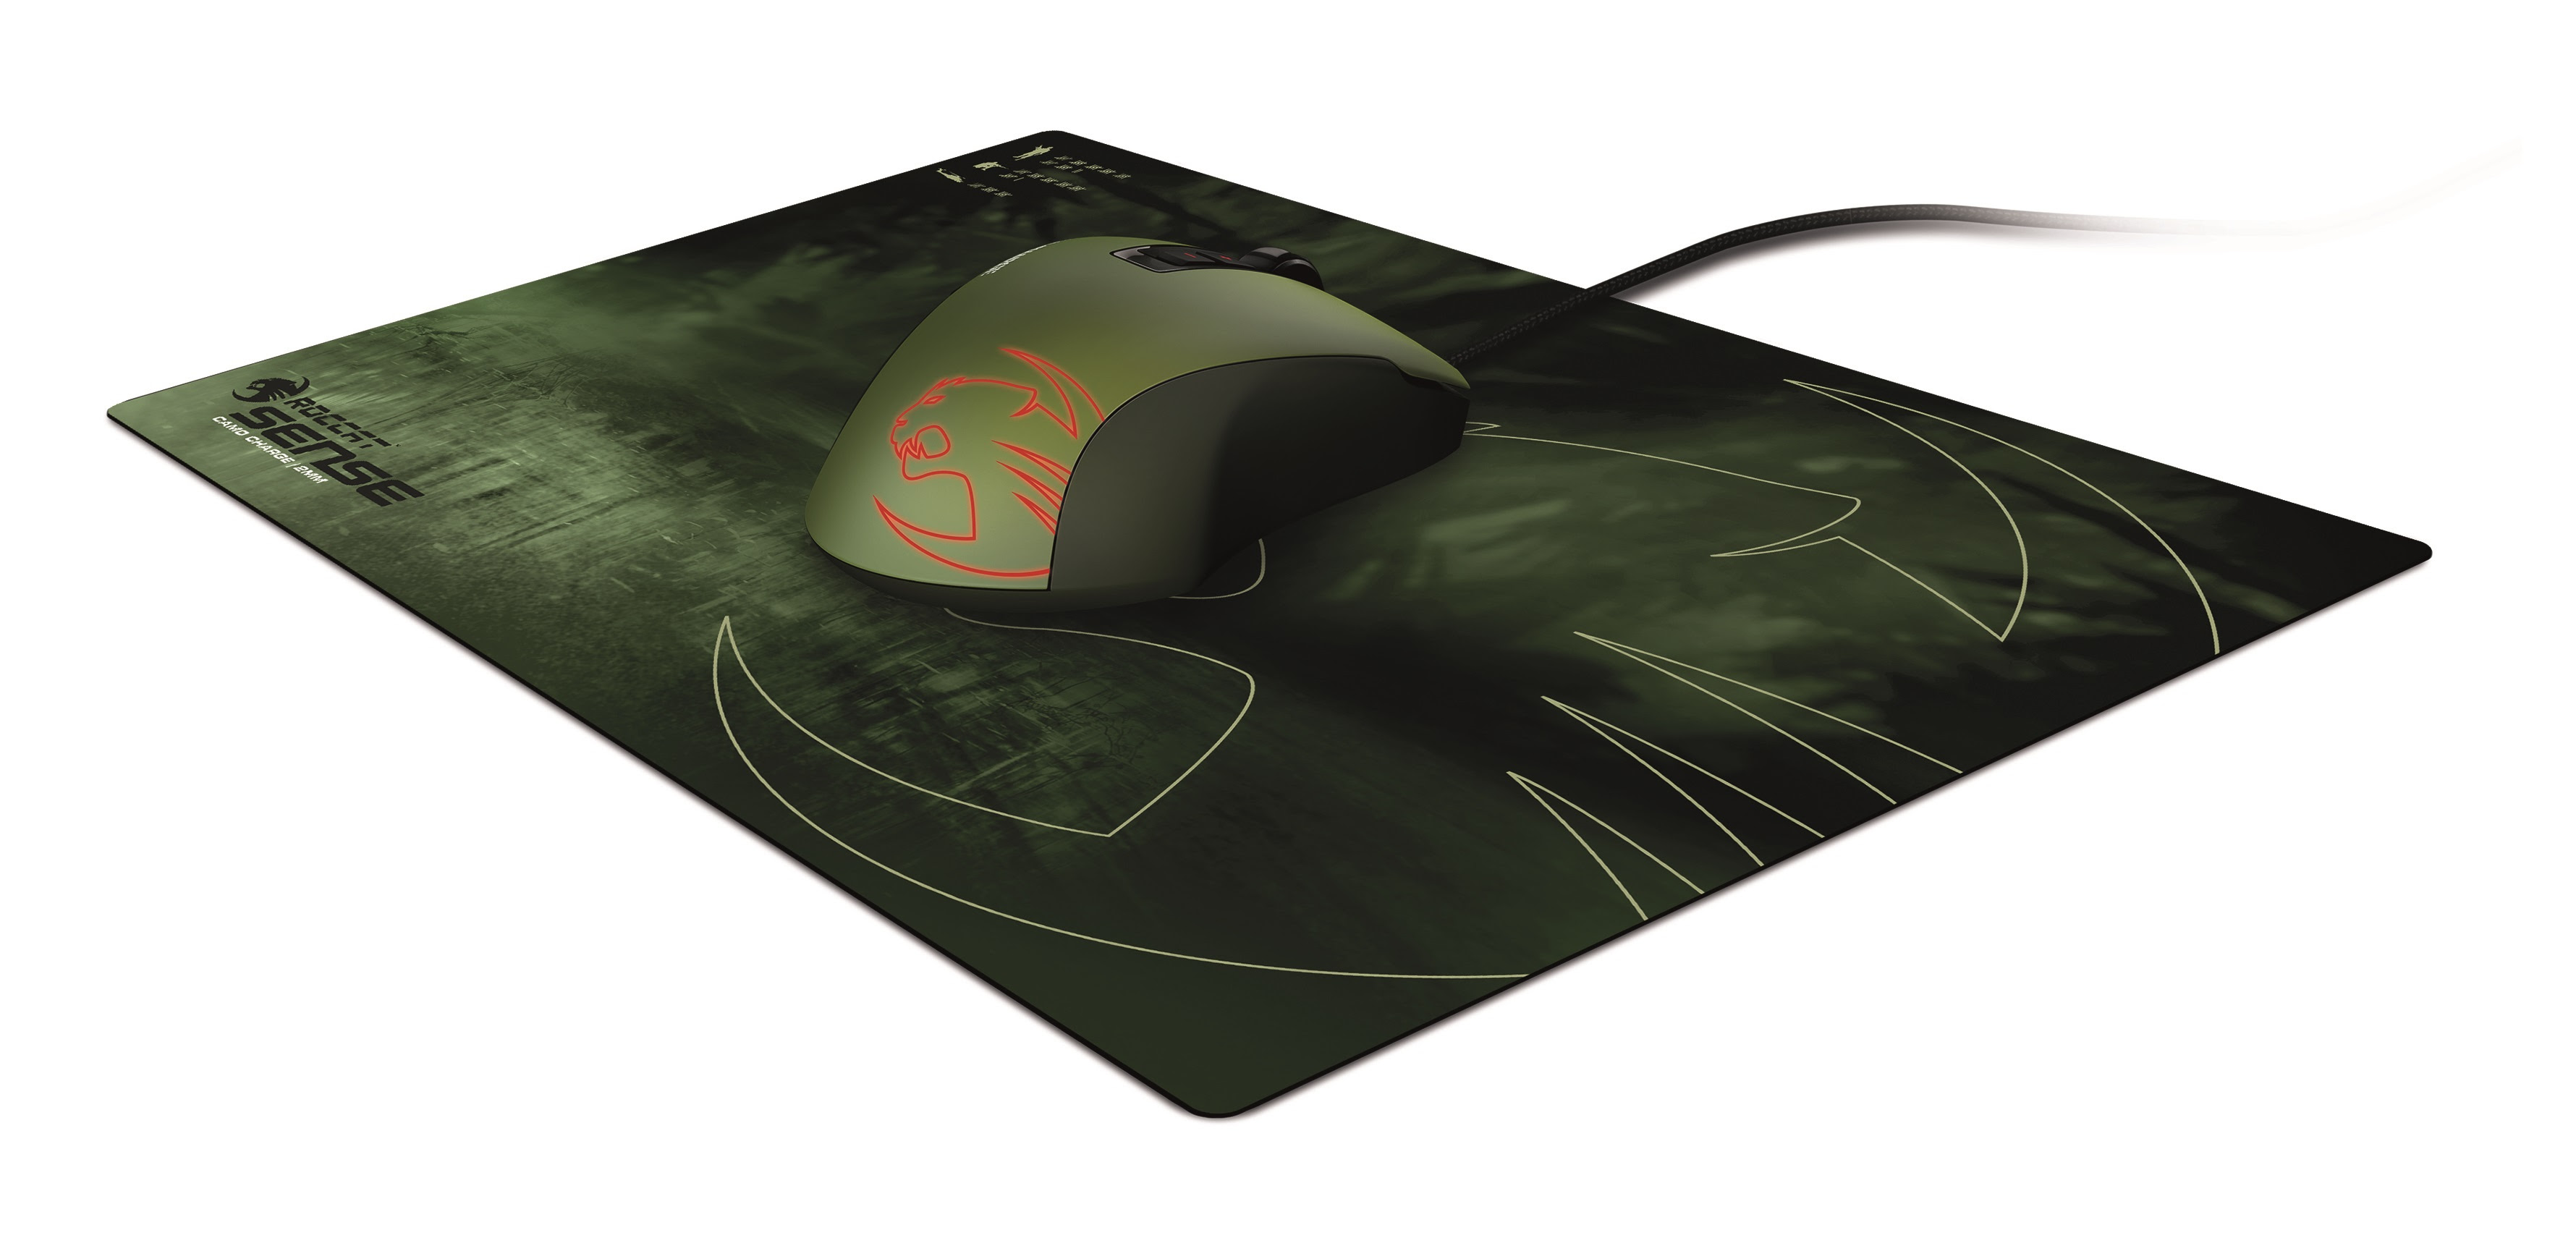 Roccat Kone Pure Military Mouse Now Available